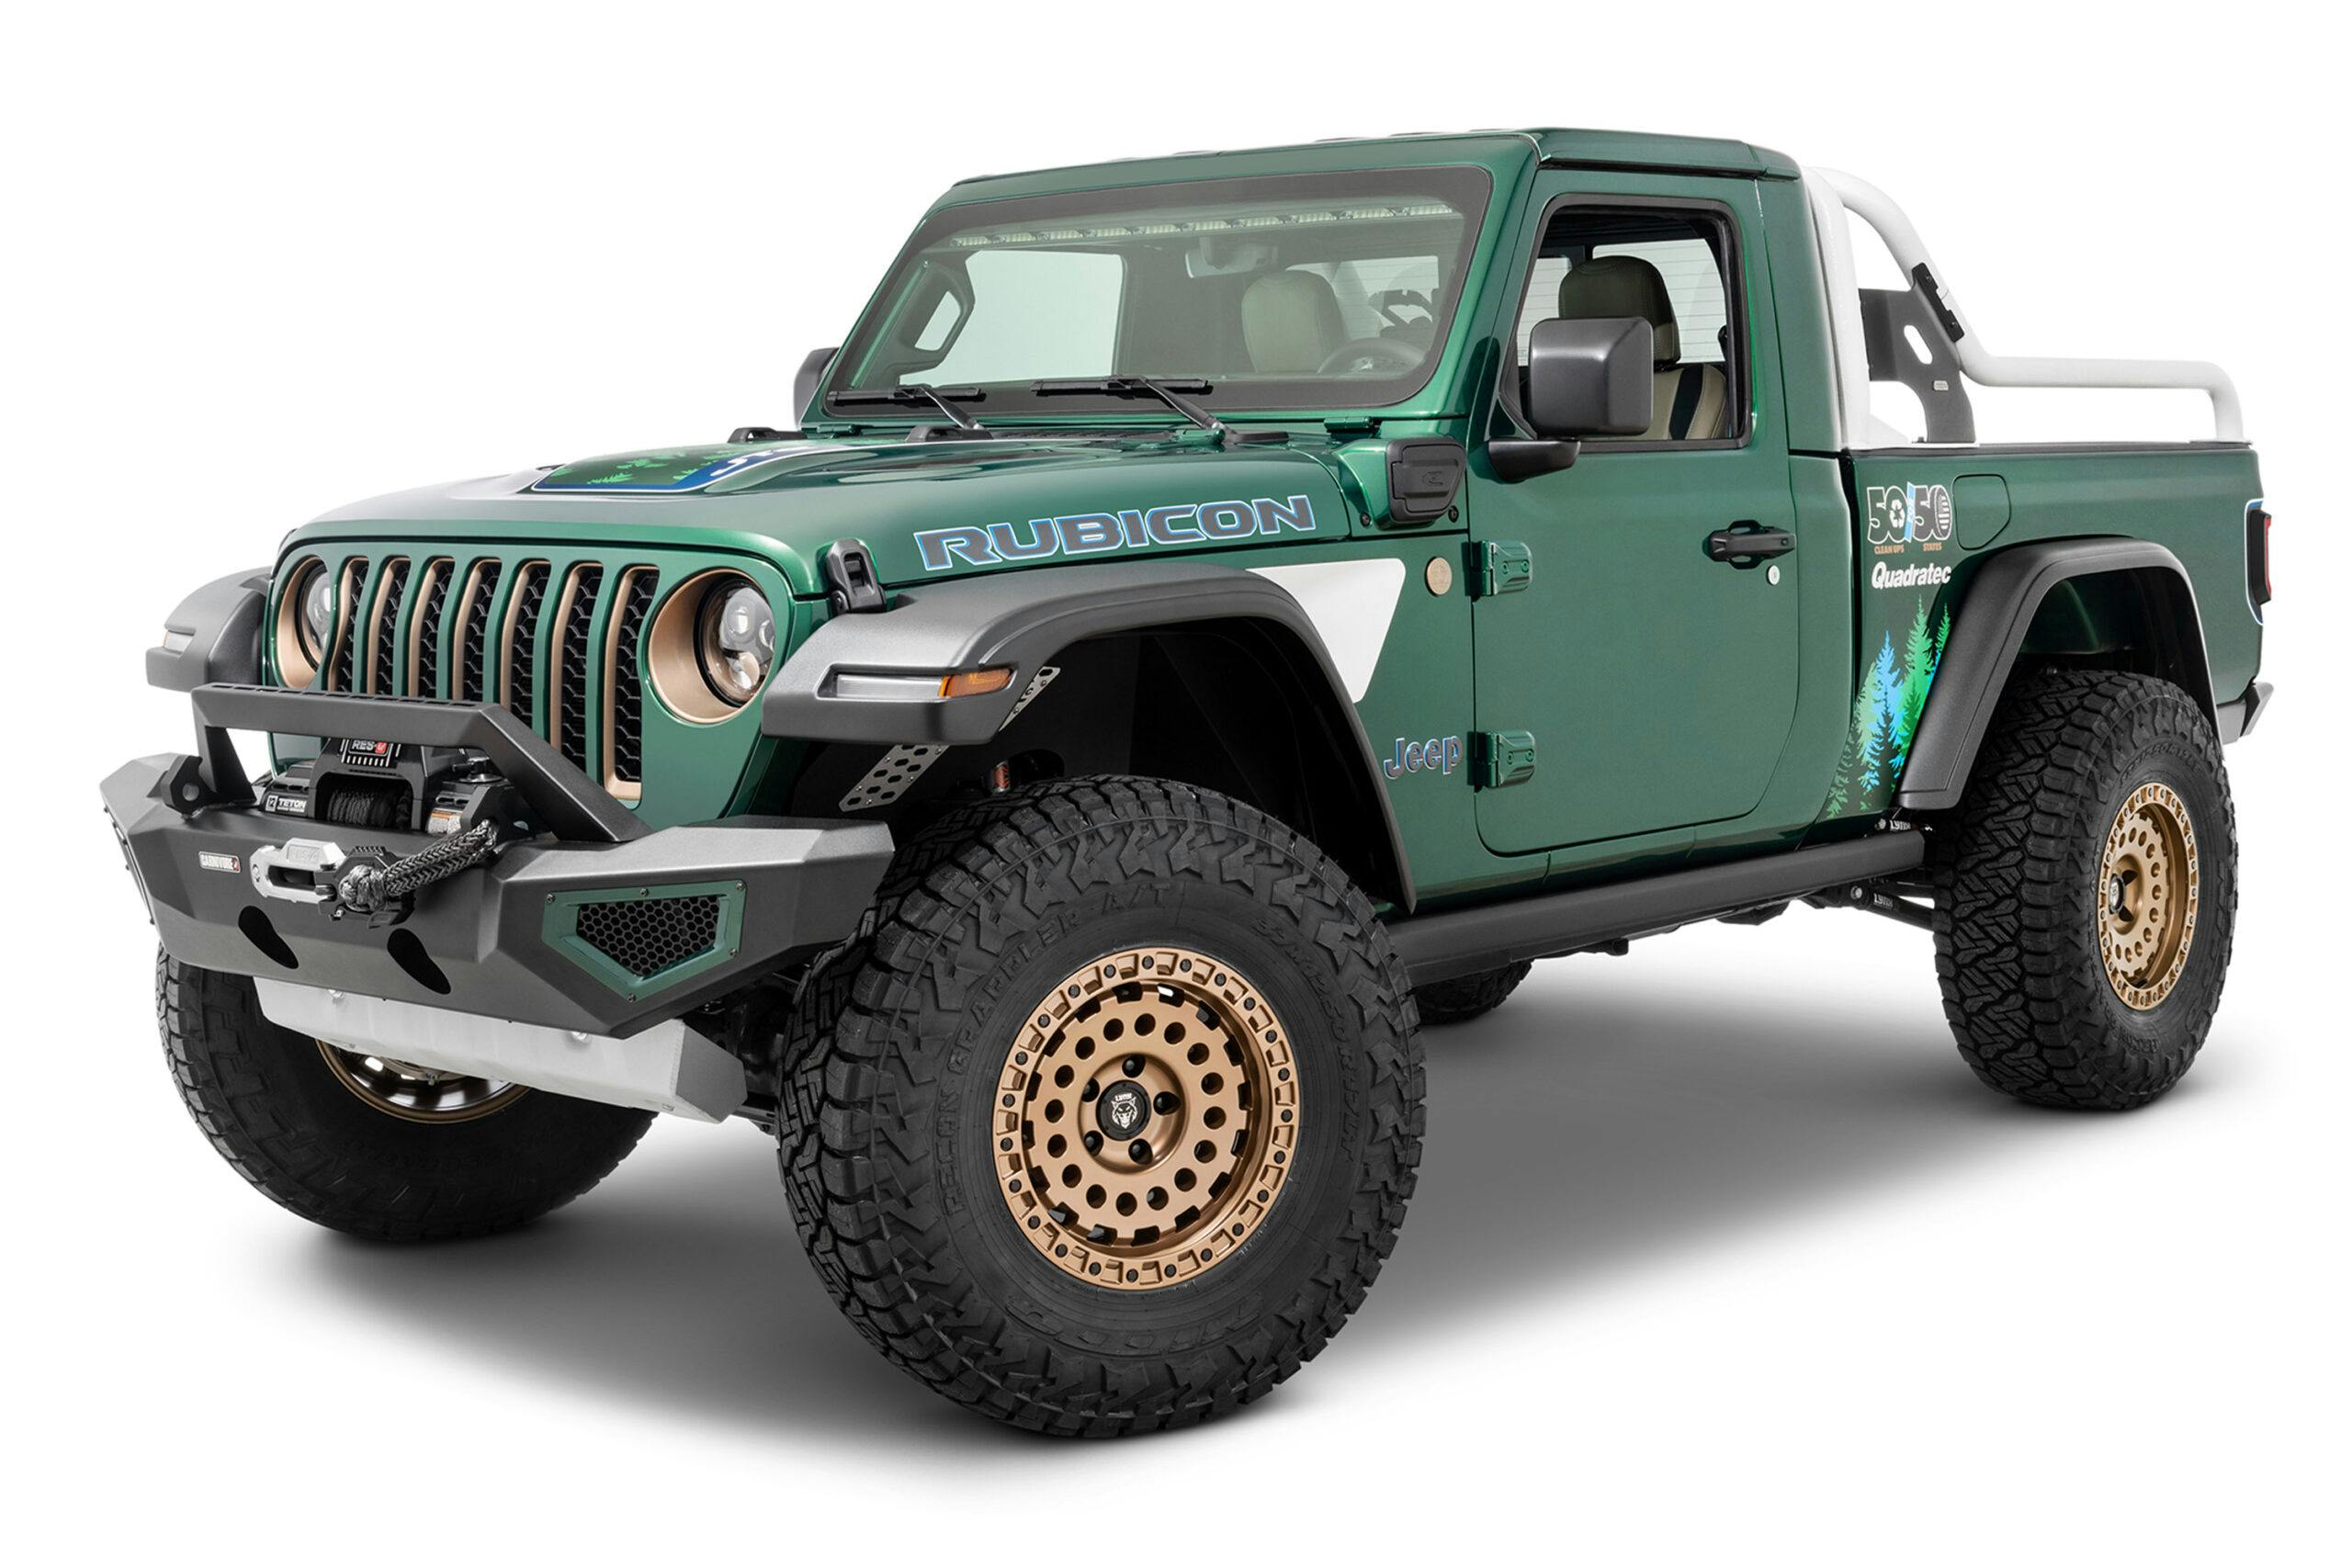 Quadratec builds the two-door Gladiator that Jeep won't - Hagerty Media